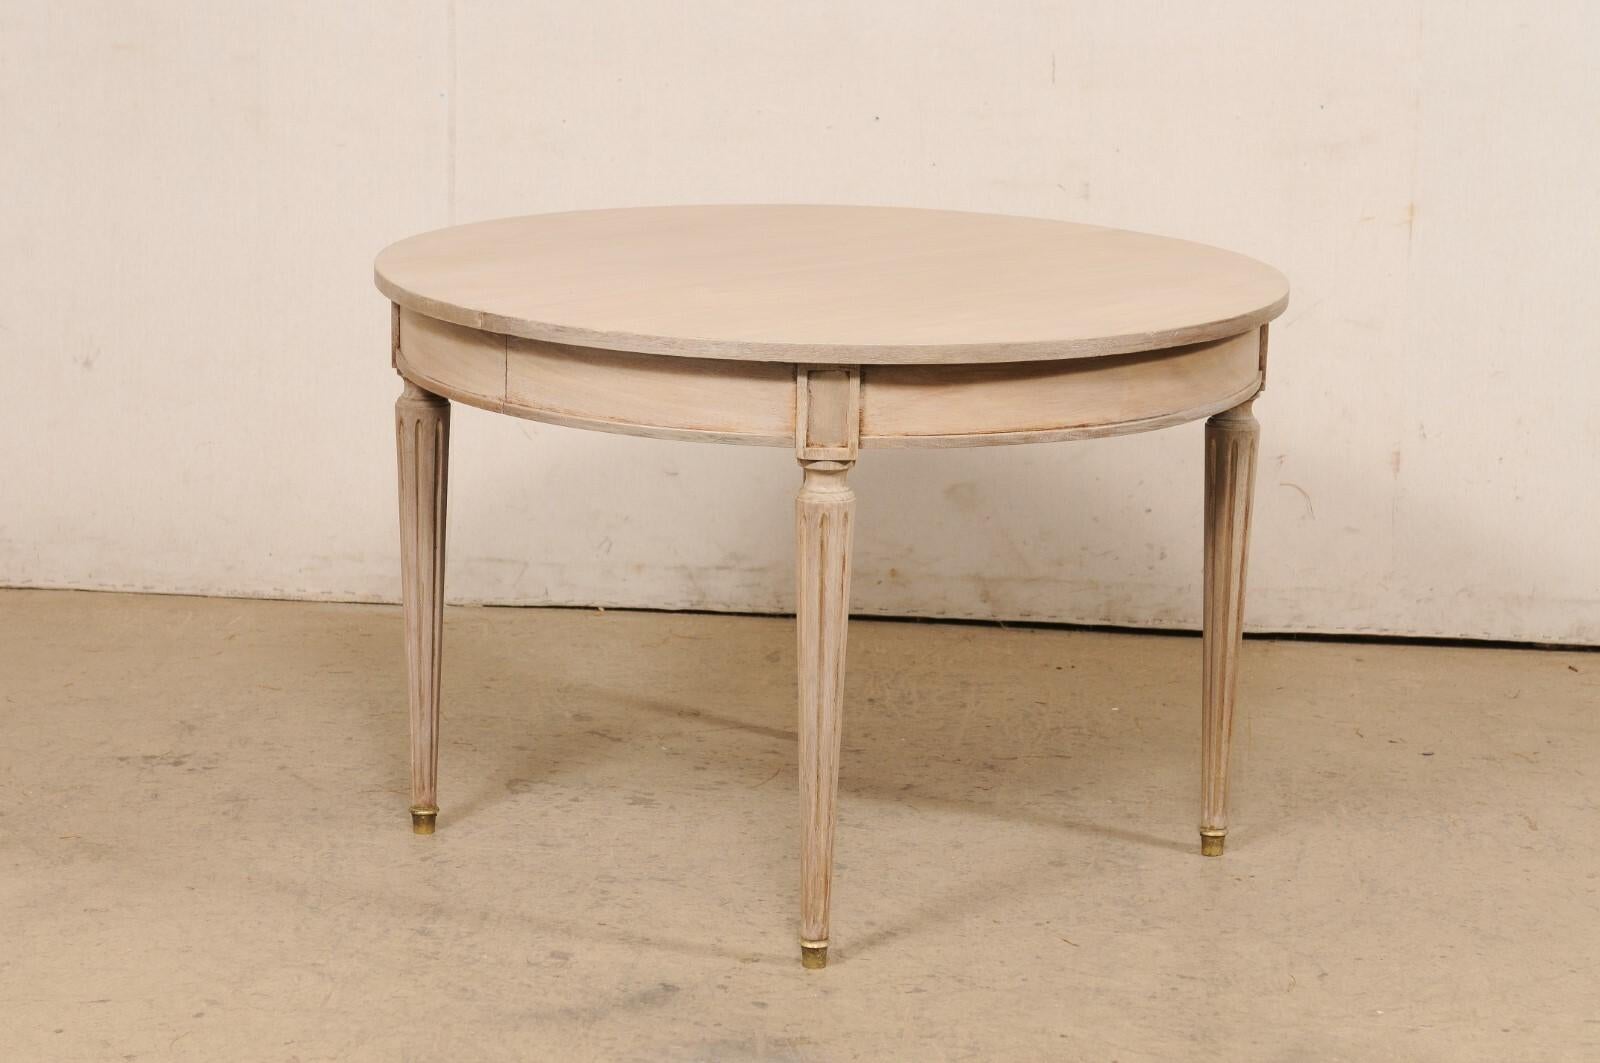 French Round Painted Wood Table w/Fluted Legs & Brass Feet, 3.5 Ft Diameter For Sale 4